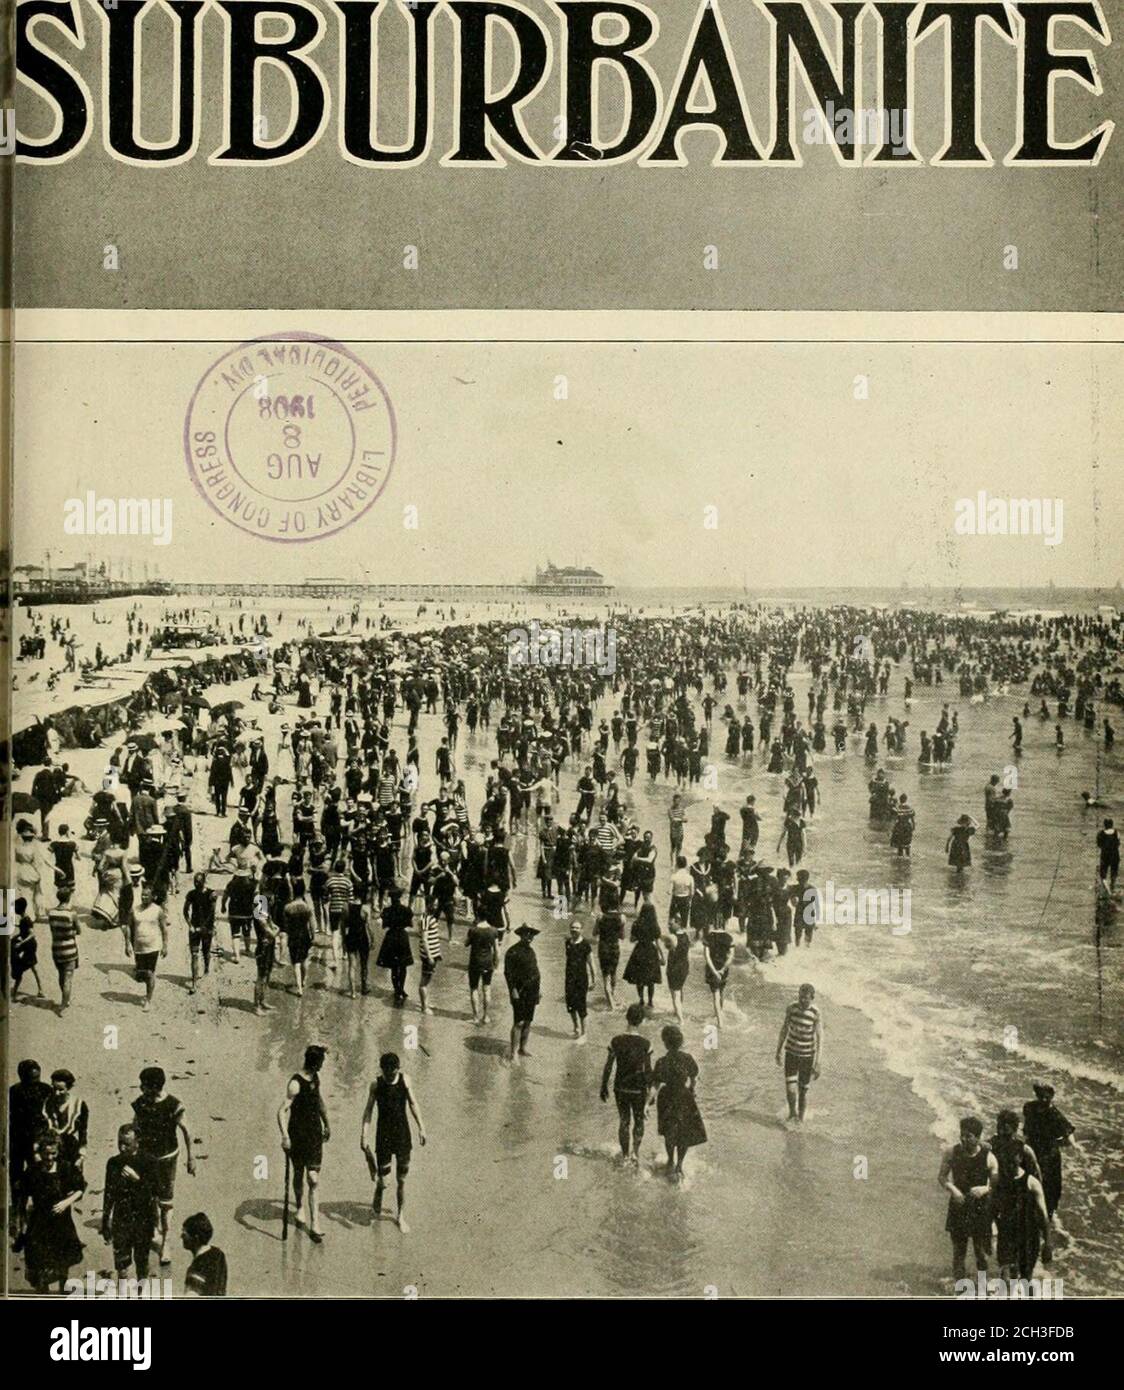 . The Suburbanite; a monthly magazine for those who are and those who ought to in interested in suburban homes . W. & Co., 13S North Ave.TRIMMER, JAS, 152 North Ave.THICKSTUN, WM. D., 197 North Avenue.VAIL, JOSEPH T., 177-179 North AvenueWOODRUFF, W. A., 103 WTest Front St. PORT READING CROSSING. DEMAREST, M. IRVING. RED BANKSULLIVAN, C. D., Opposite R. R. StationWILLGUSS, D. W. ROSELLE—ROSELLE PARK BONNELL, W. P., 15 Westfield Ave., West. SEWARENSEWAREN IMP. CO., M. Irving Demarest, Agent SOMERVILLEENK, JNO.H. J. HOLMESMESSLER, D. N.NOLAN & SWINTON, 12 West Main St. WEST END—LONG BRANCHKING, Stock Photo